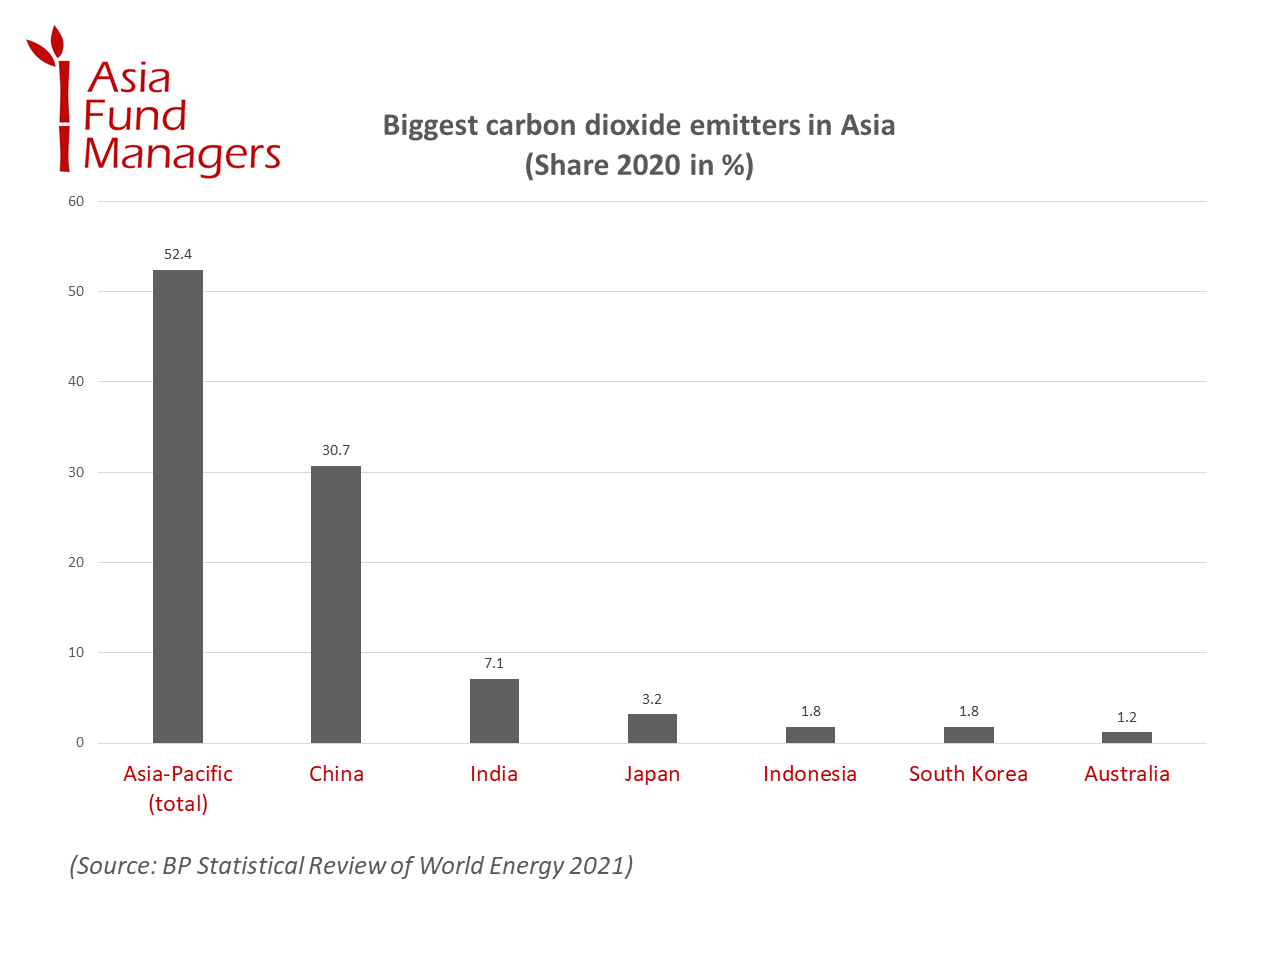 Asia biggest carbon dioxide emitters 2020 (share in %)